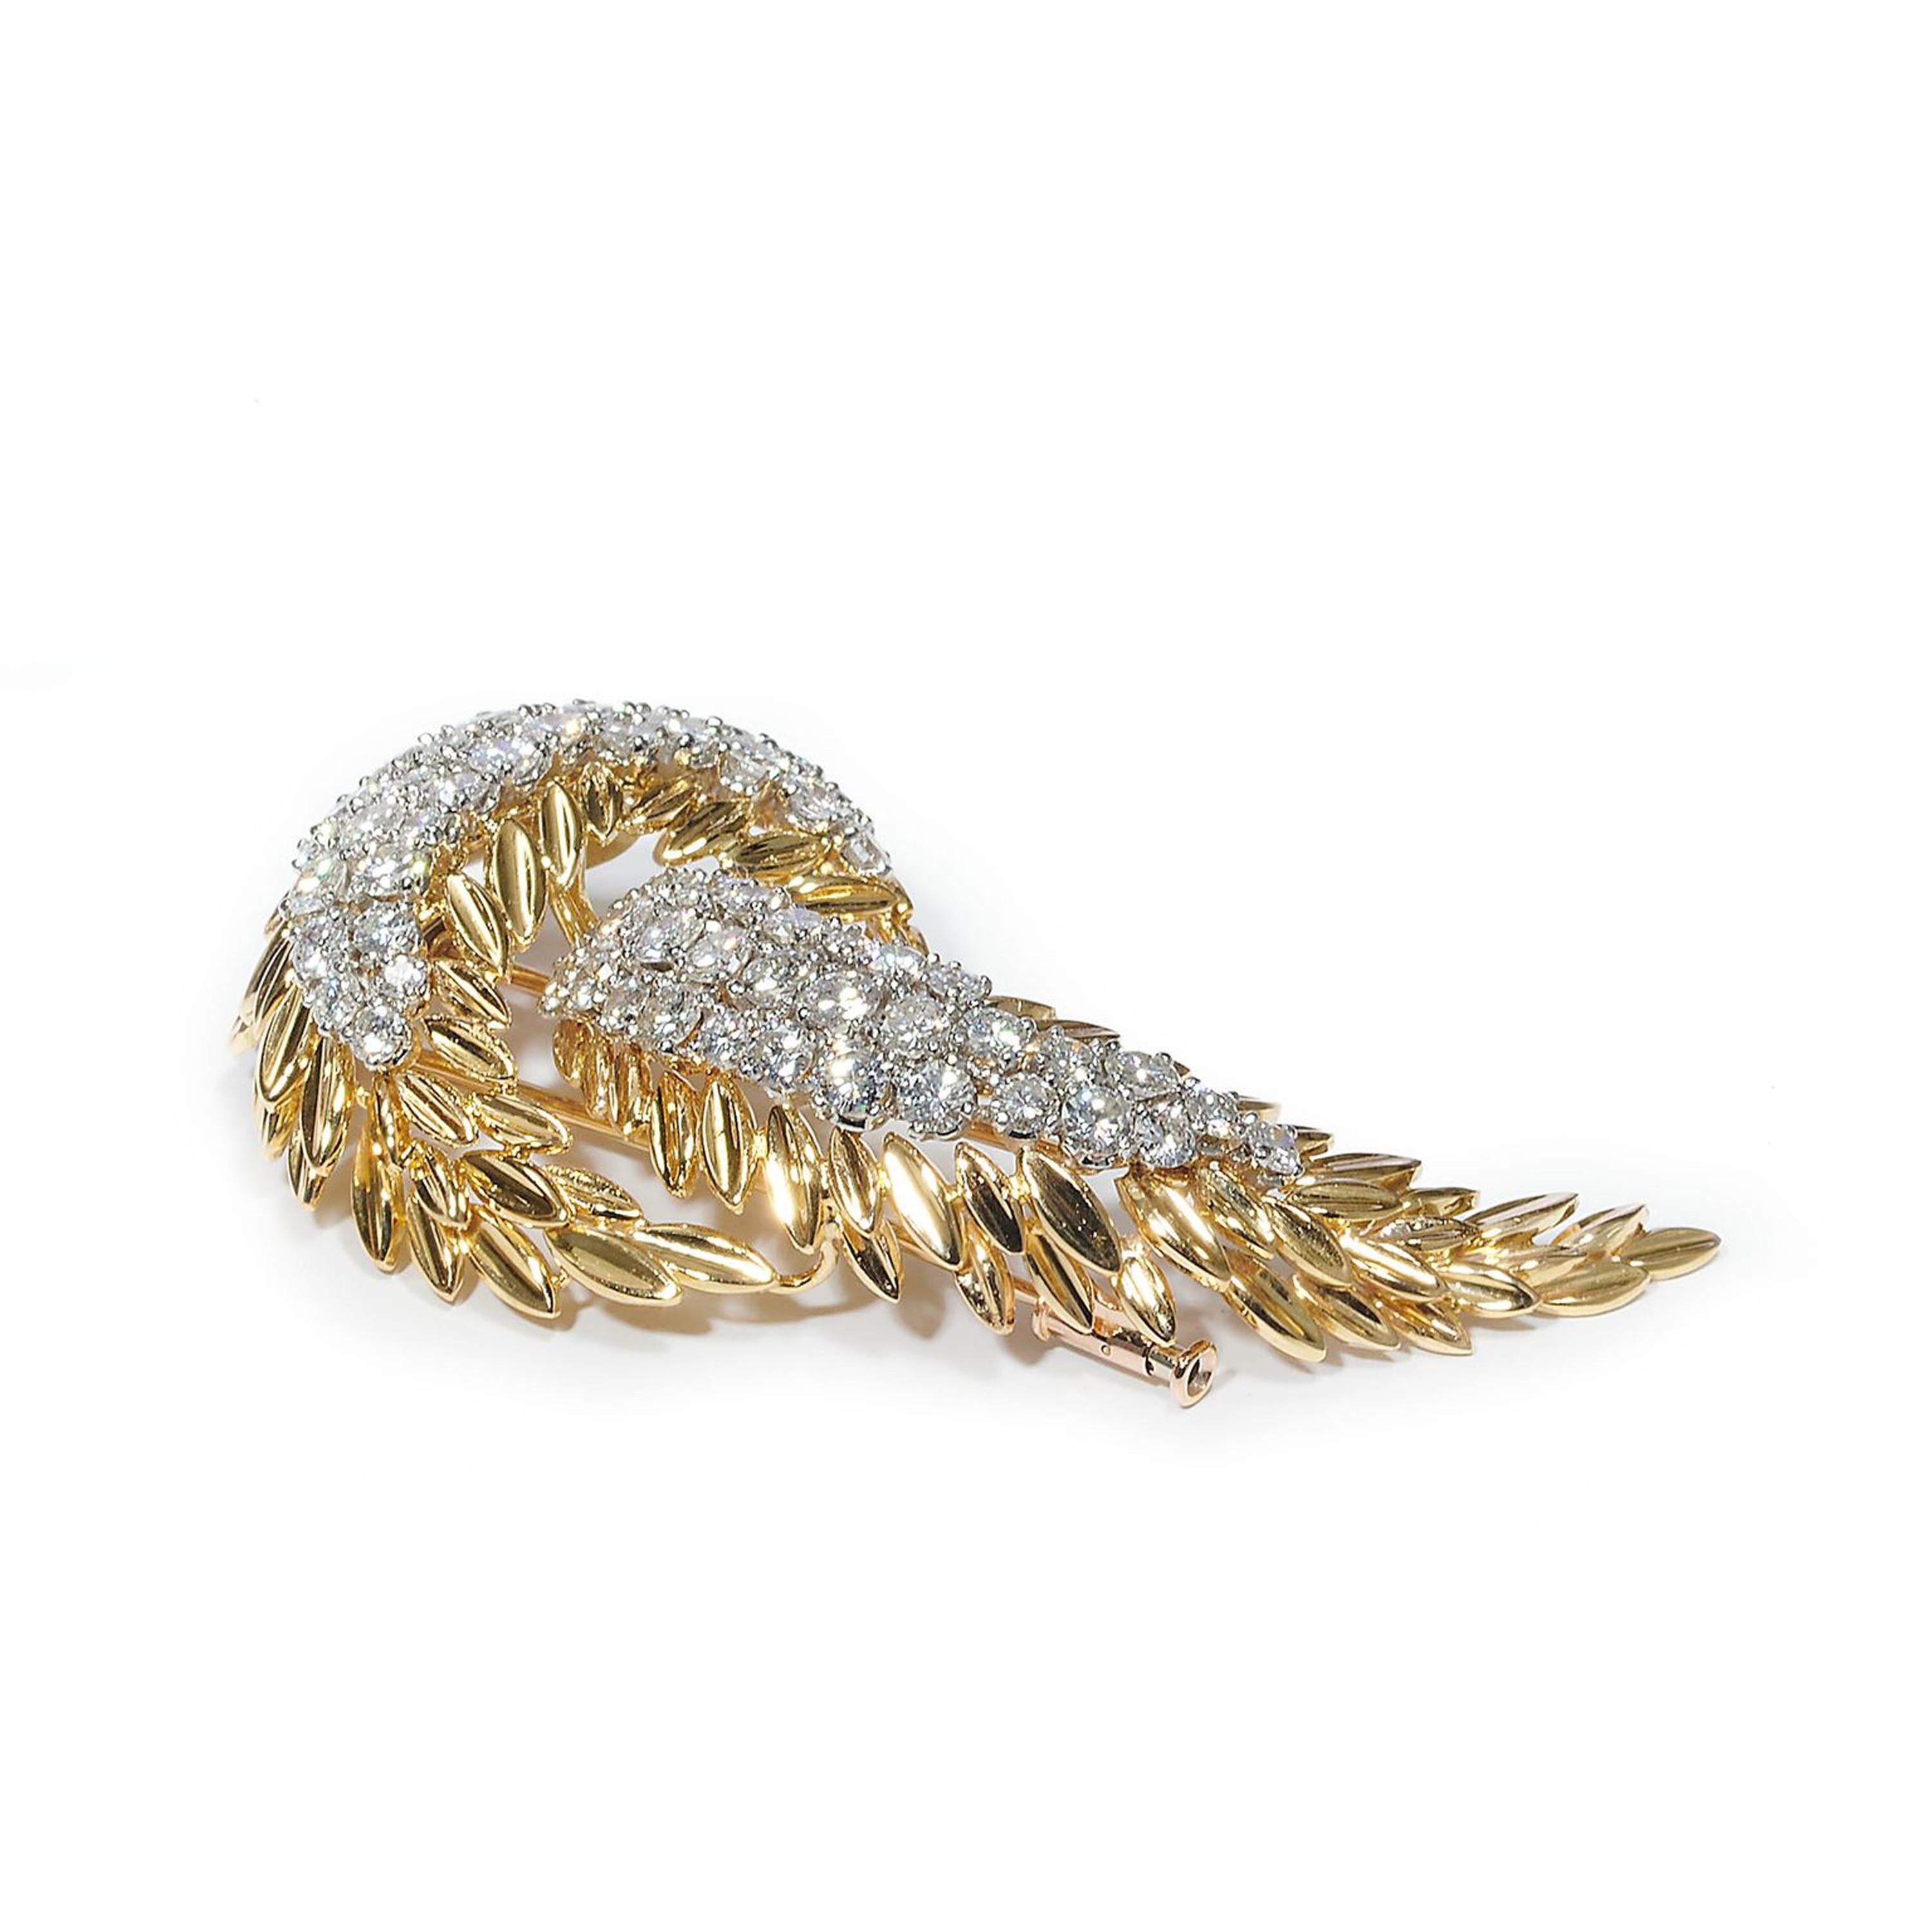 A vintage, French, diamond and gold abstract feather or palm leaf and fruit brooch, set with two clusters of round brilliant-cut diamonds, with an estimated total weight of 5.95 carats, in white gold, four claw settings, surrounded by polished,